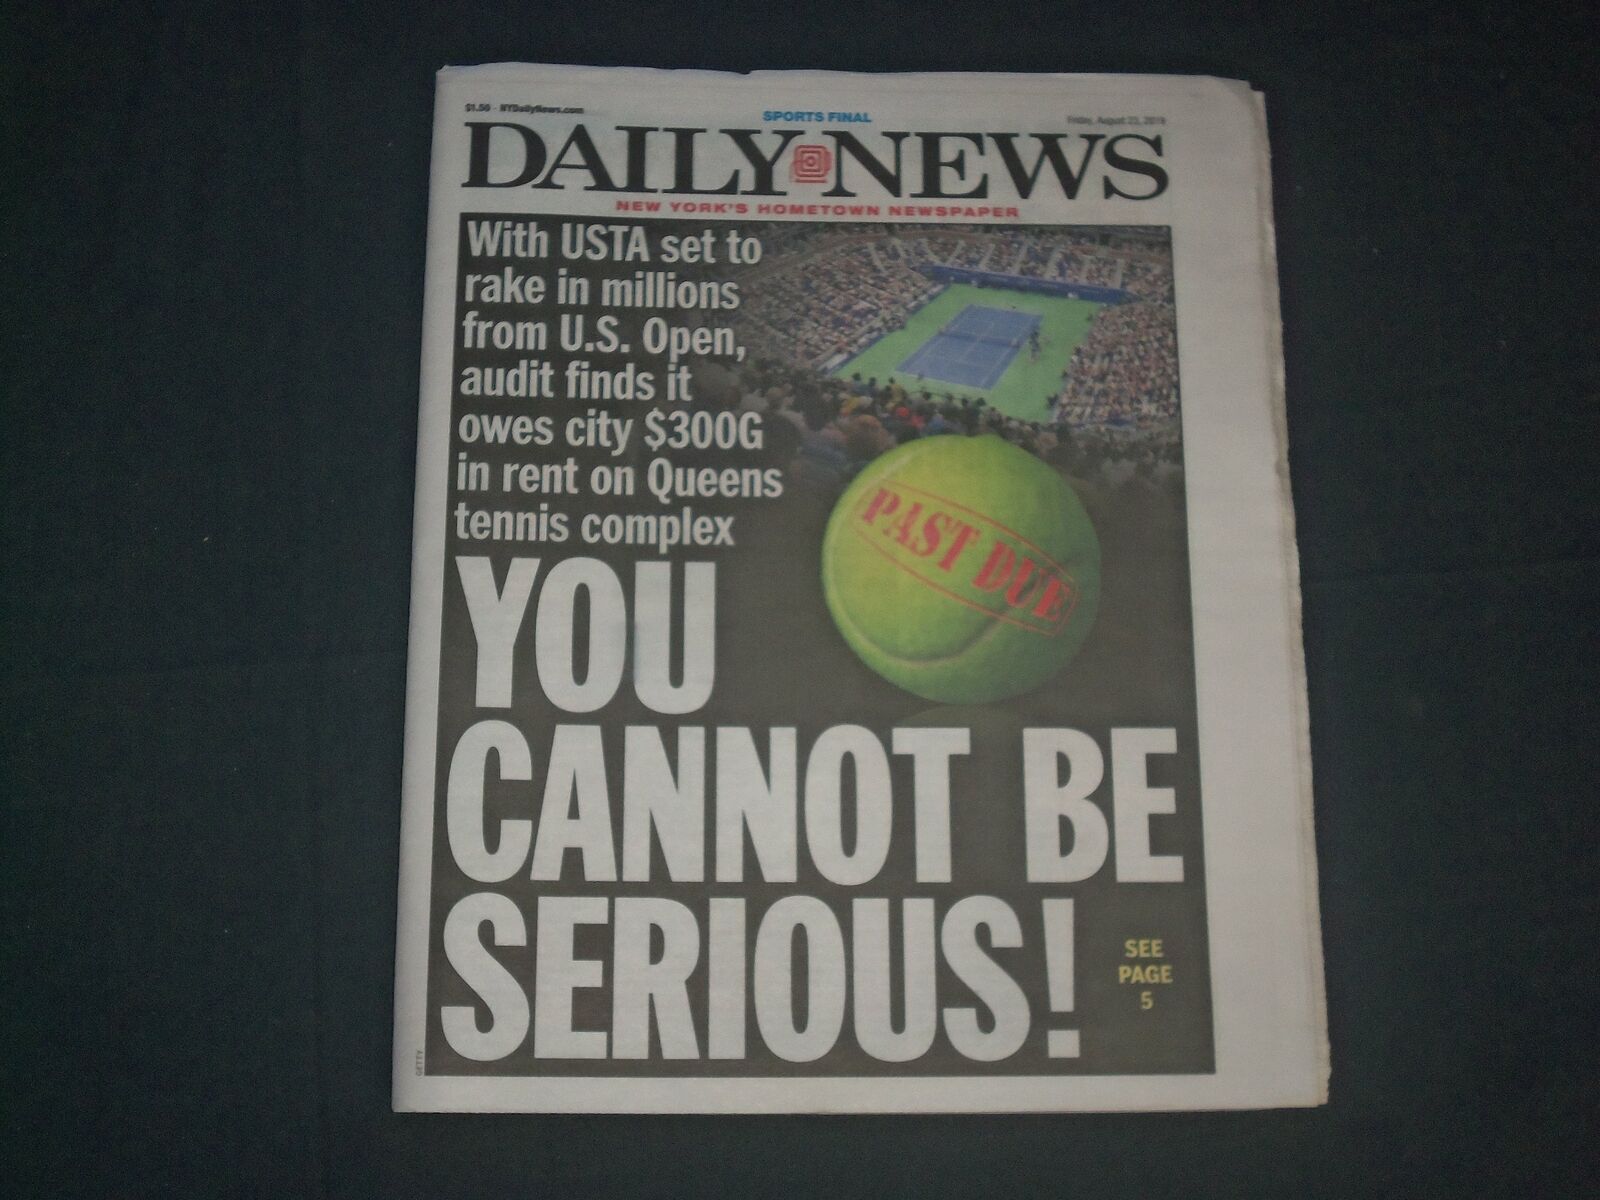 2019 AUGUST 23 NEW YORK DAILY NEWS NEWSPAPER - USTA OWES NYC $300G IN RENT